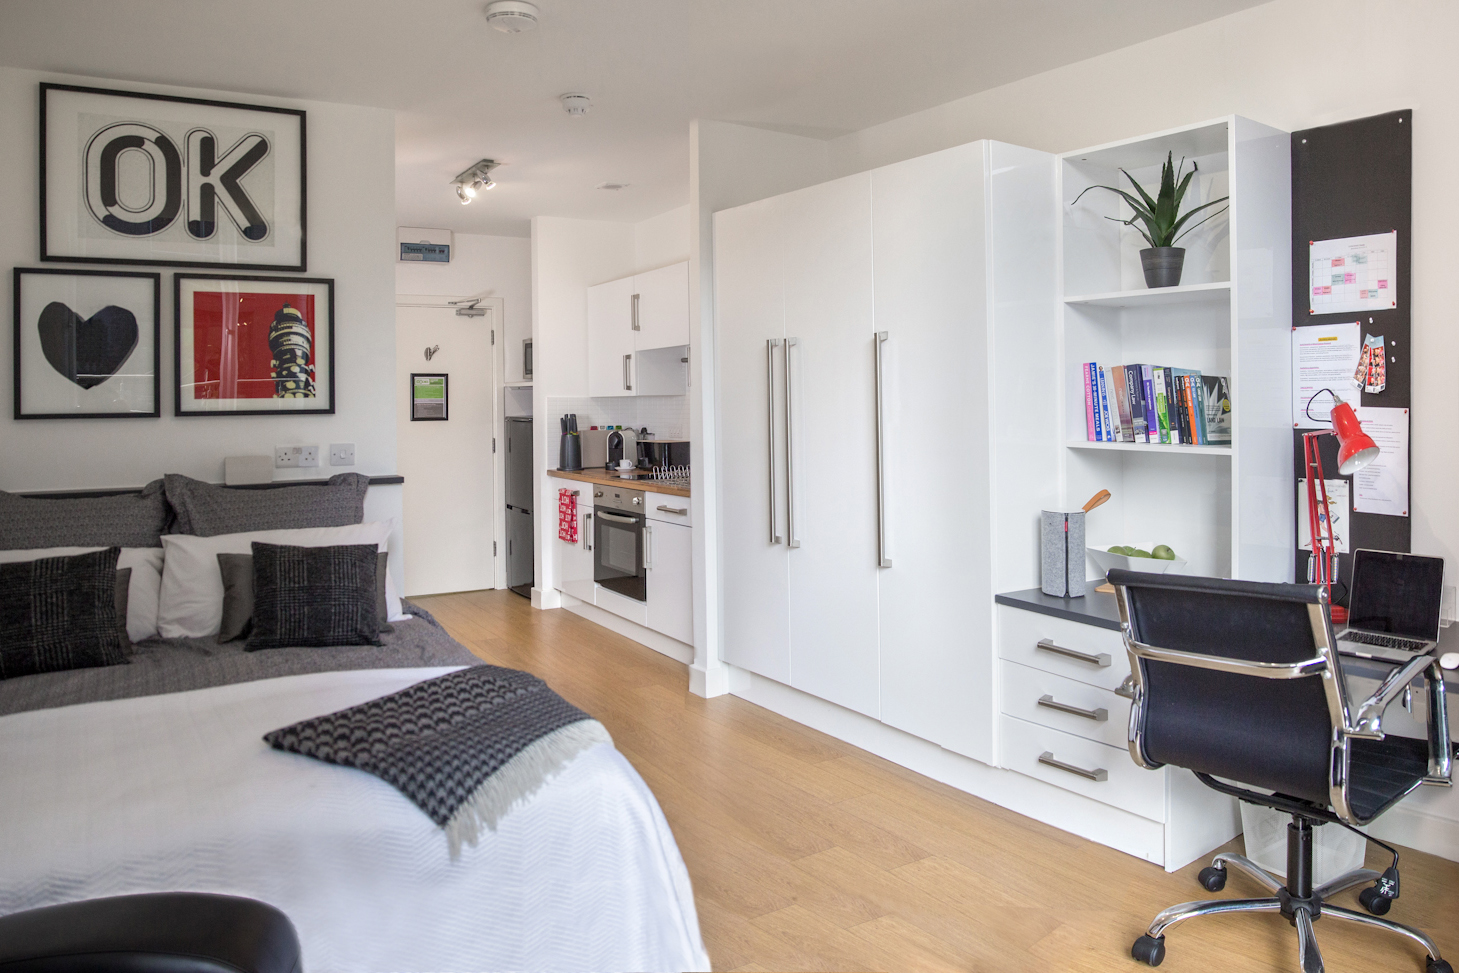 Deluxe Studio at CODE Leicester Student Accommodation